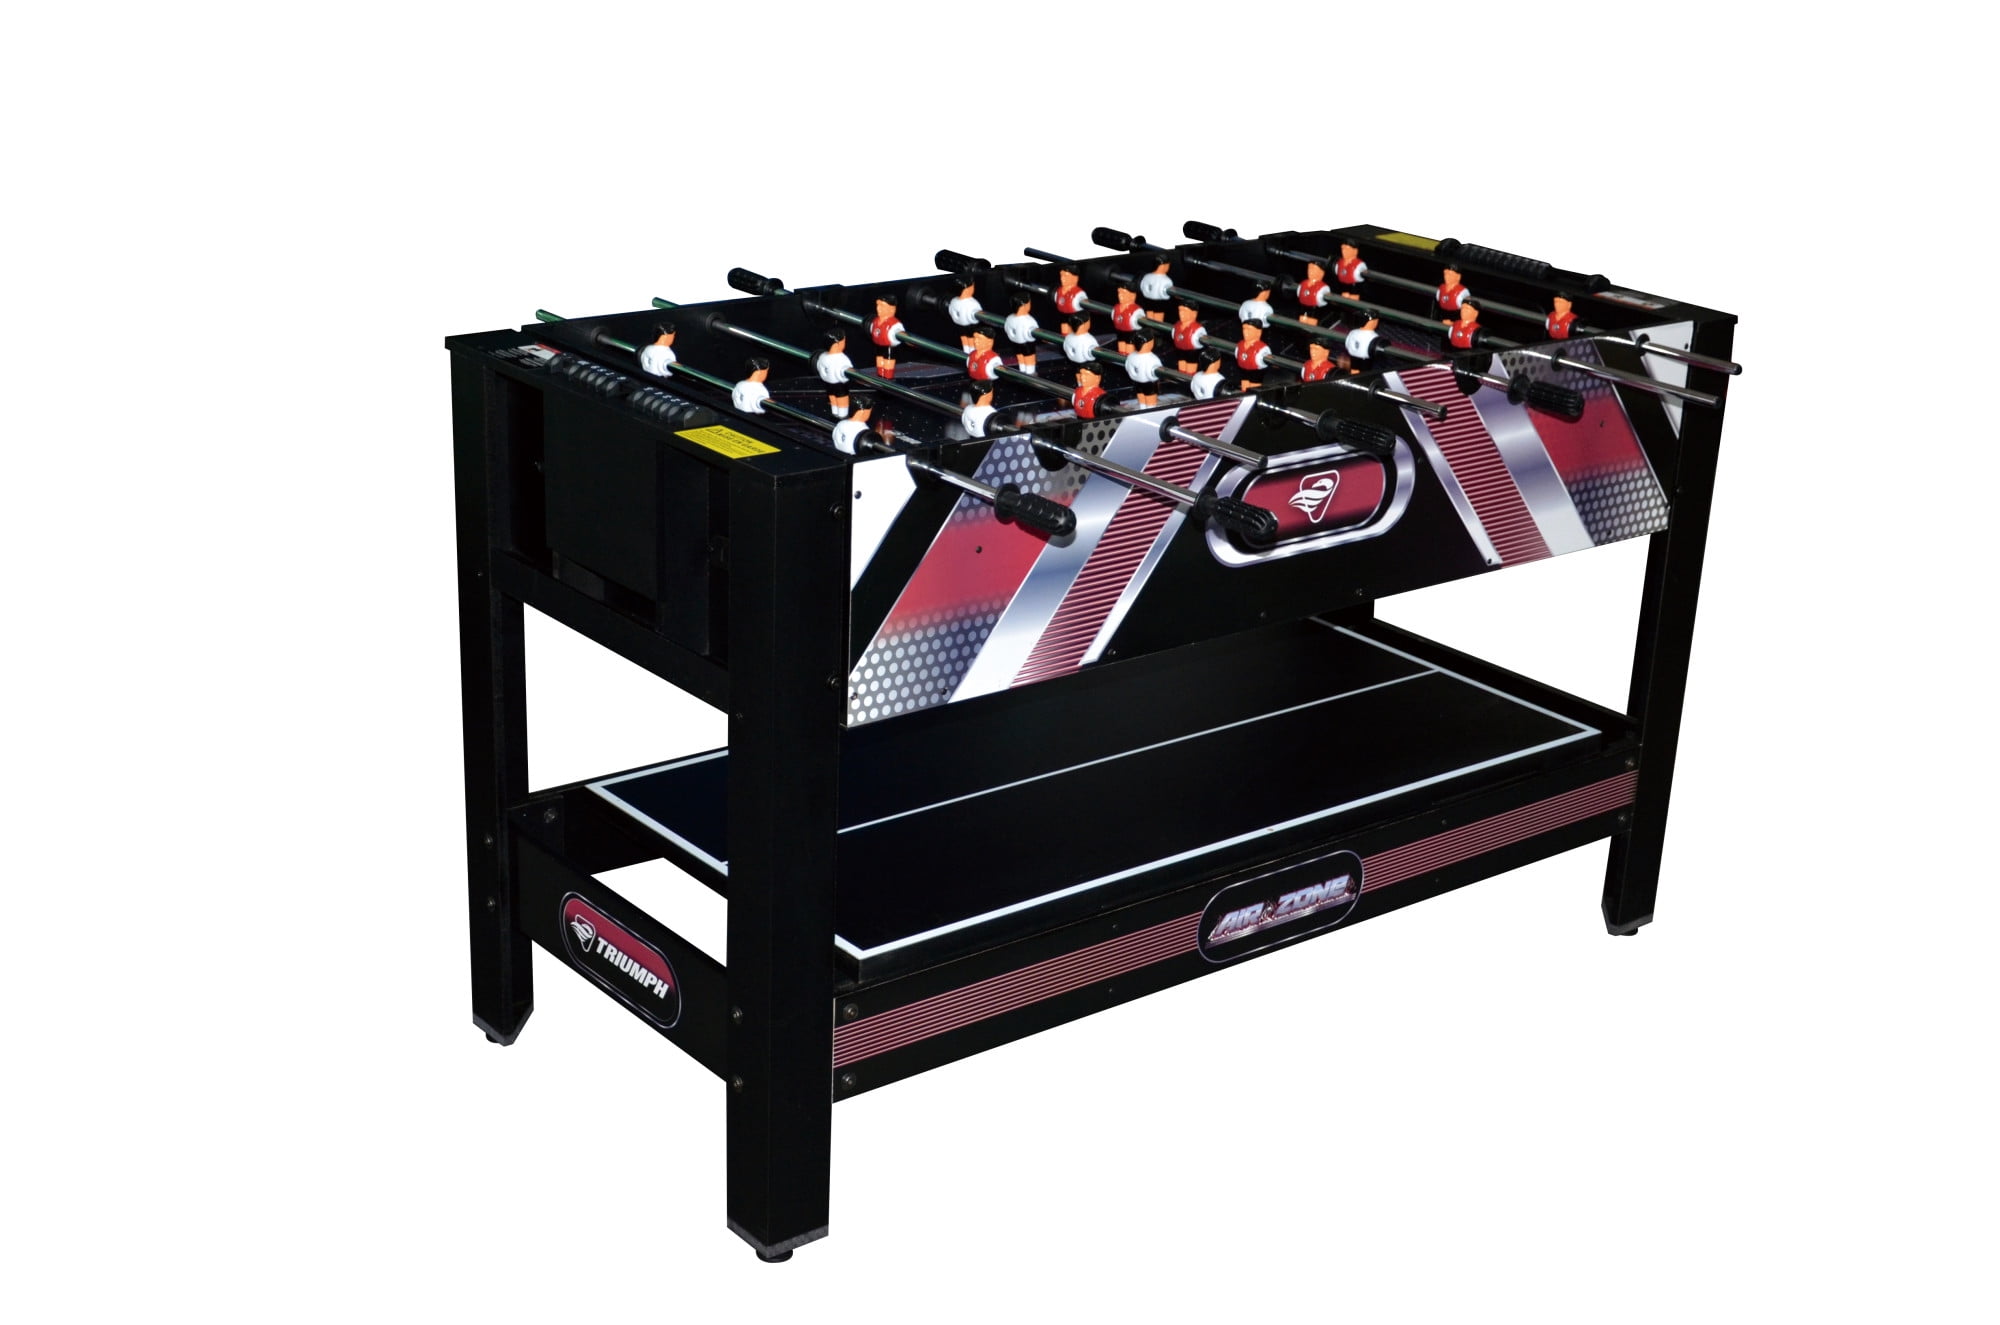 Buy Cougar Fury Table Tennis Table - 17mm - Sportsuncle